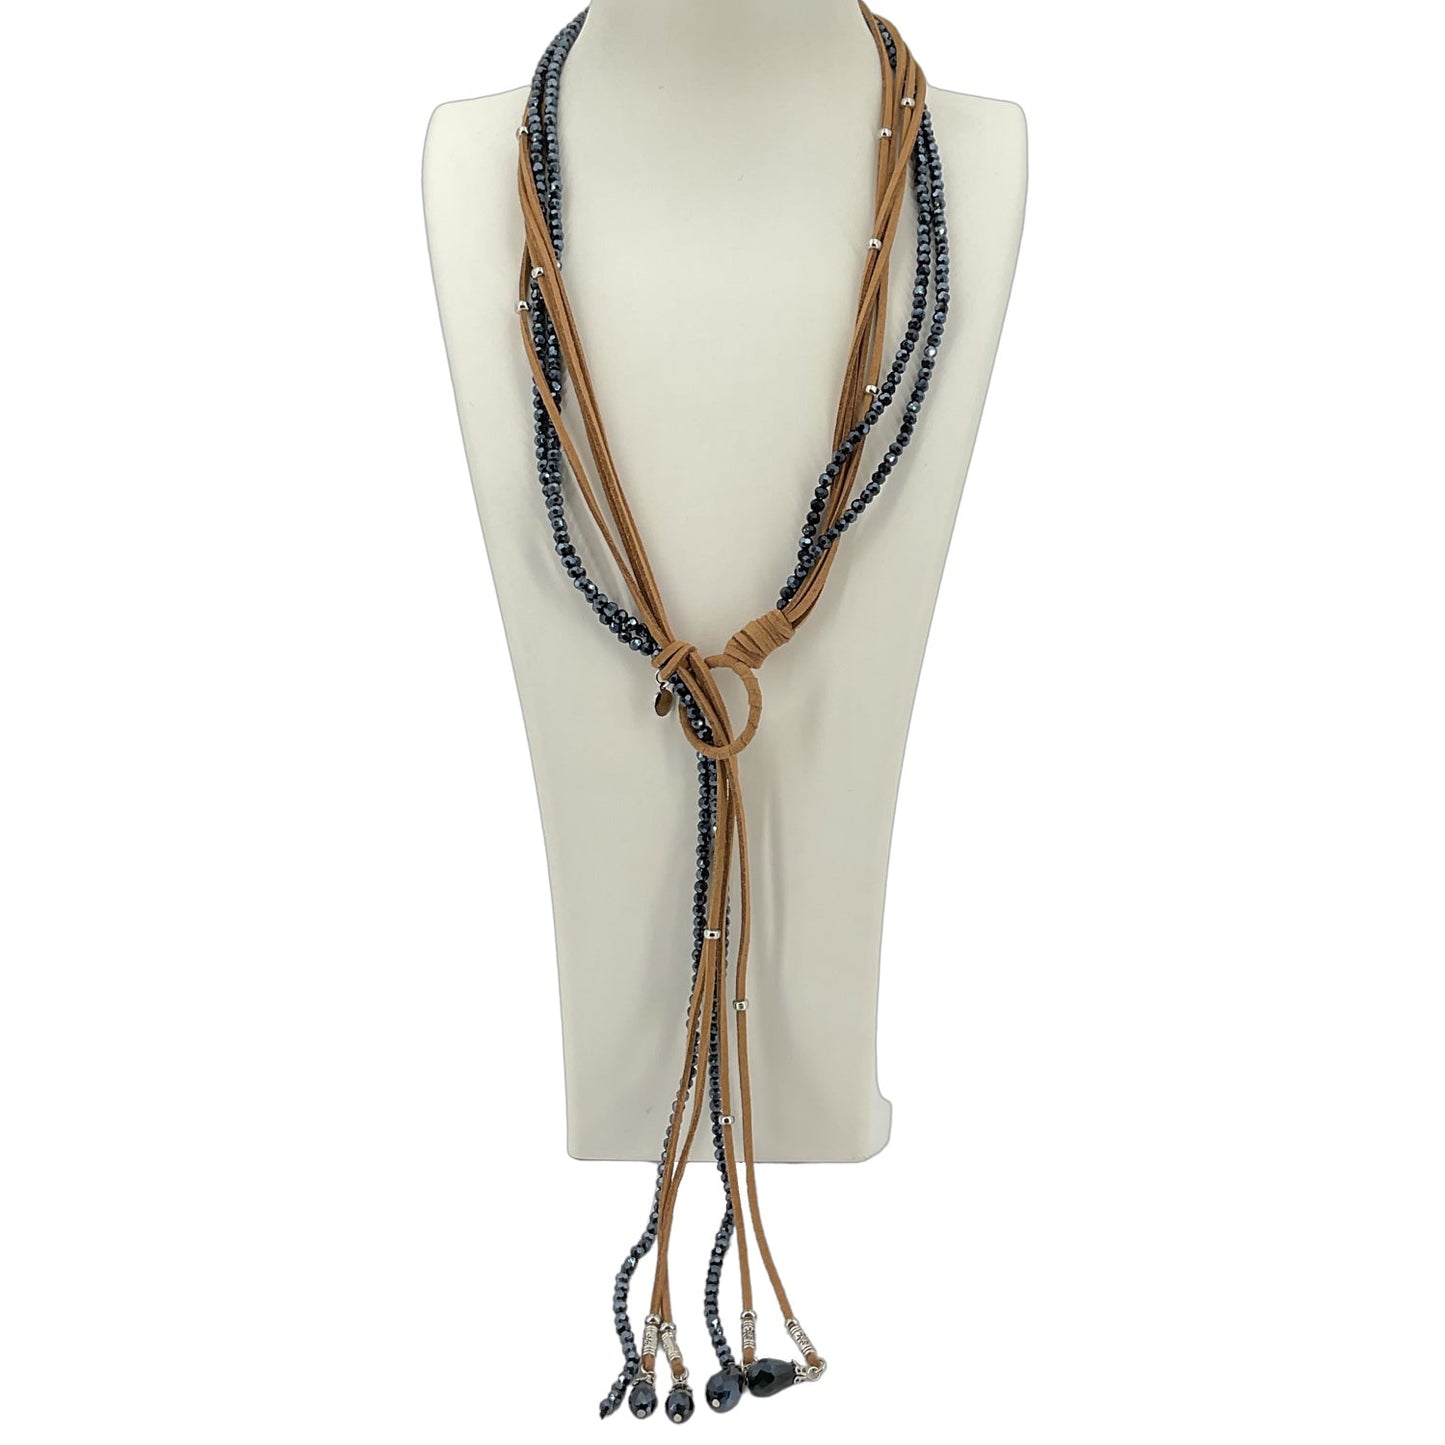 CHICO'S FAUX LEATHER AND BEADS WRAP NECKLACE